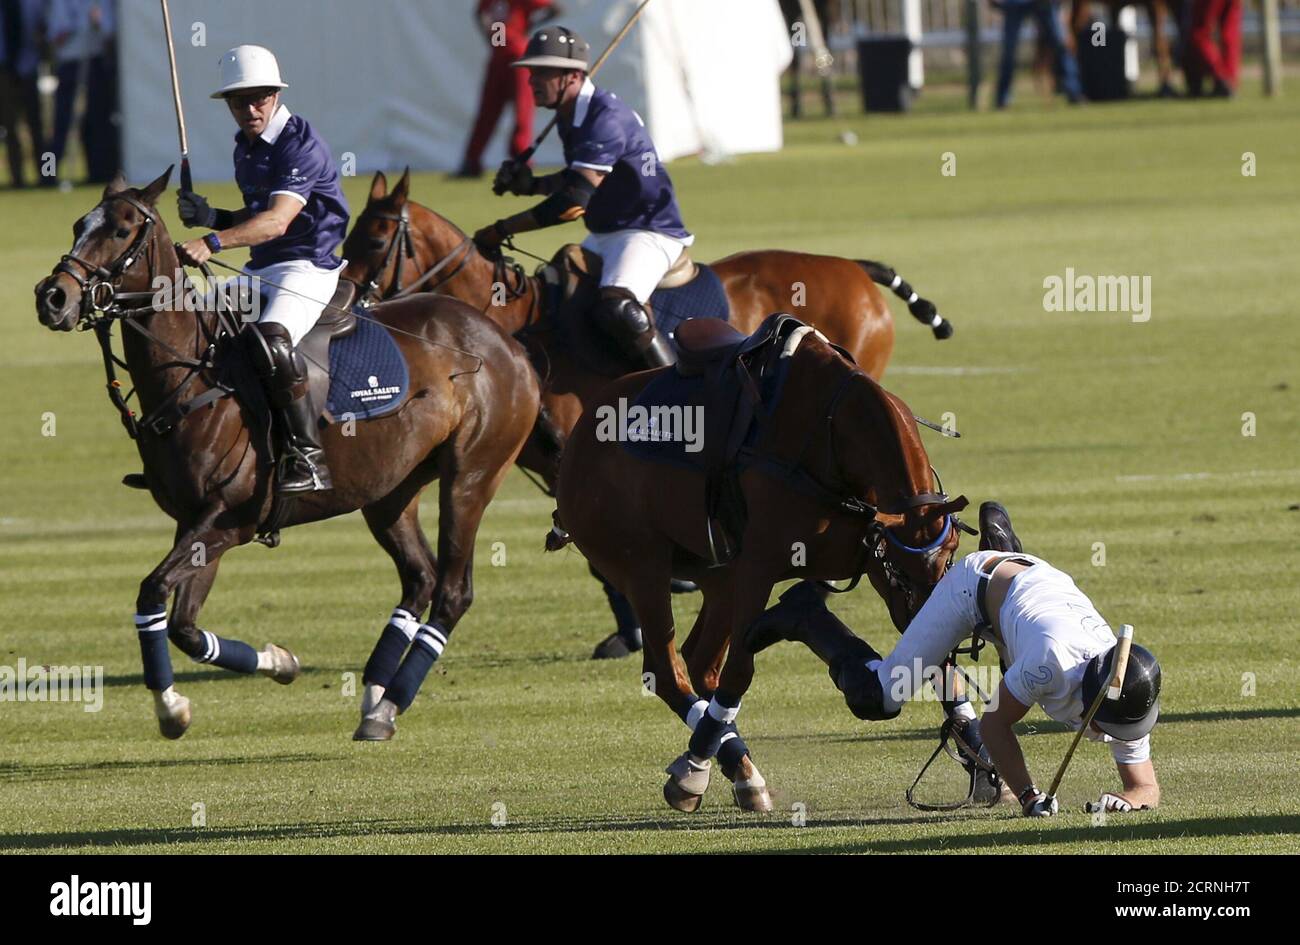 Horse Polo South Africa High Resolution Stock Photography and Images - Alamy